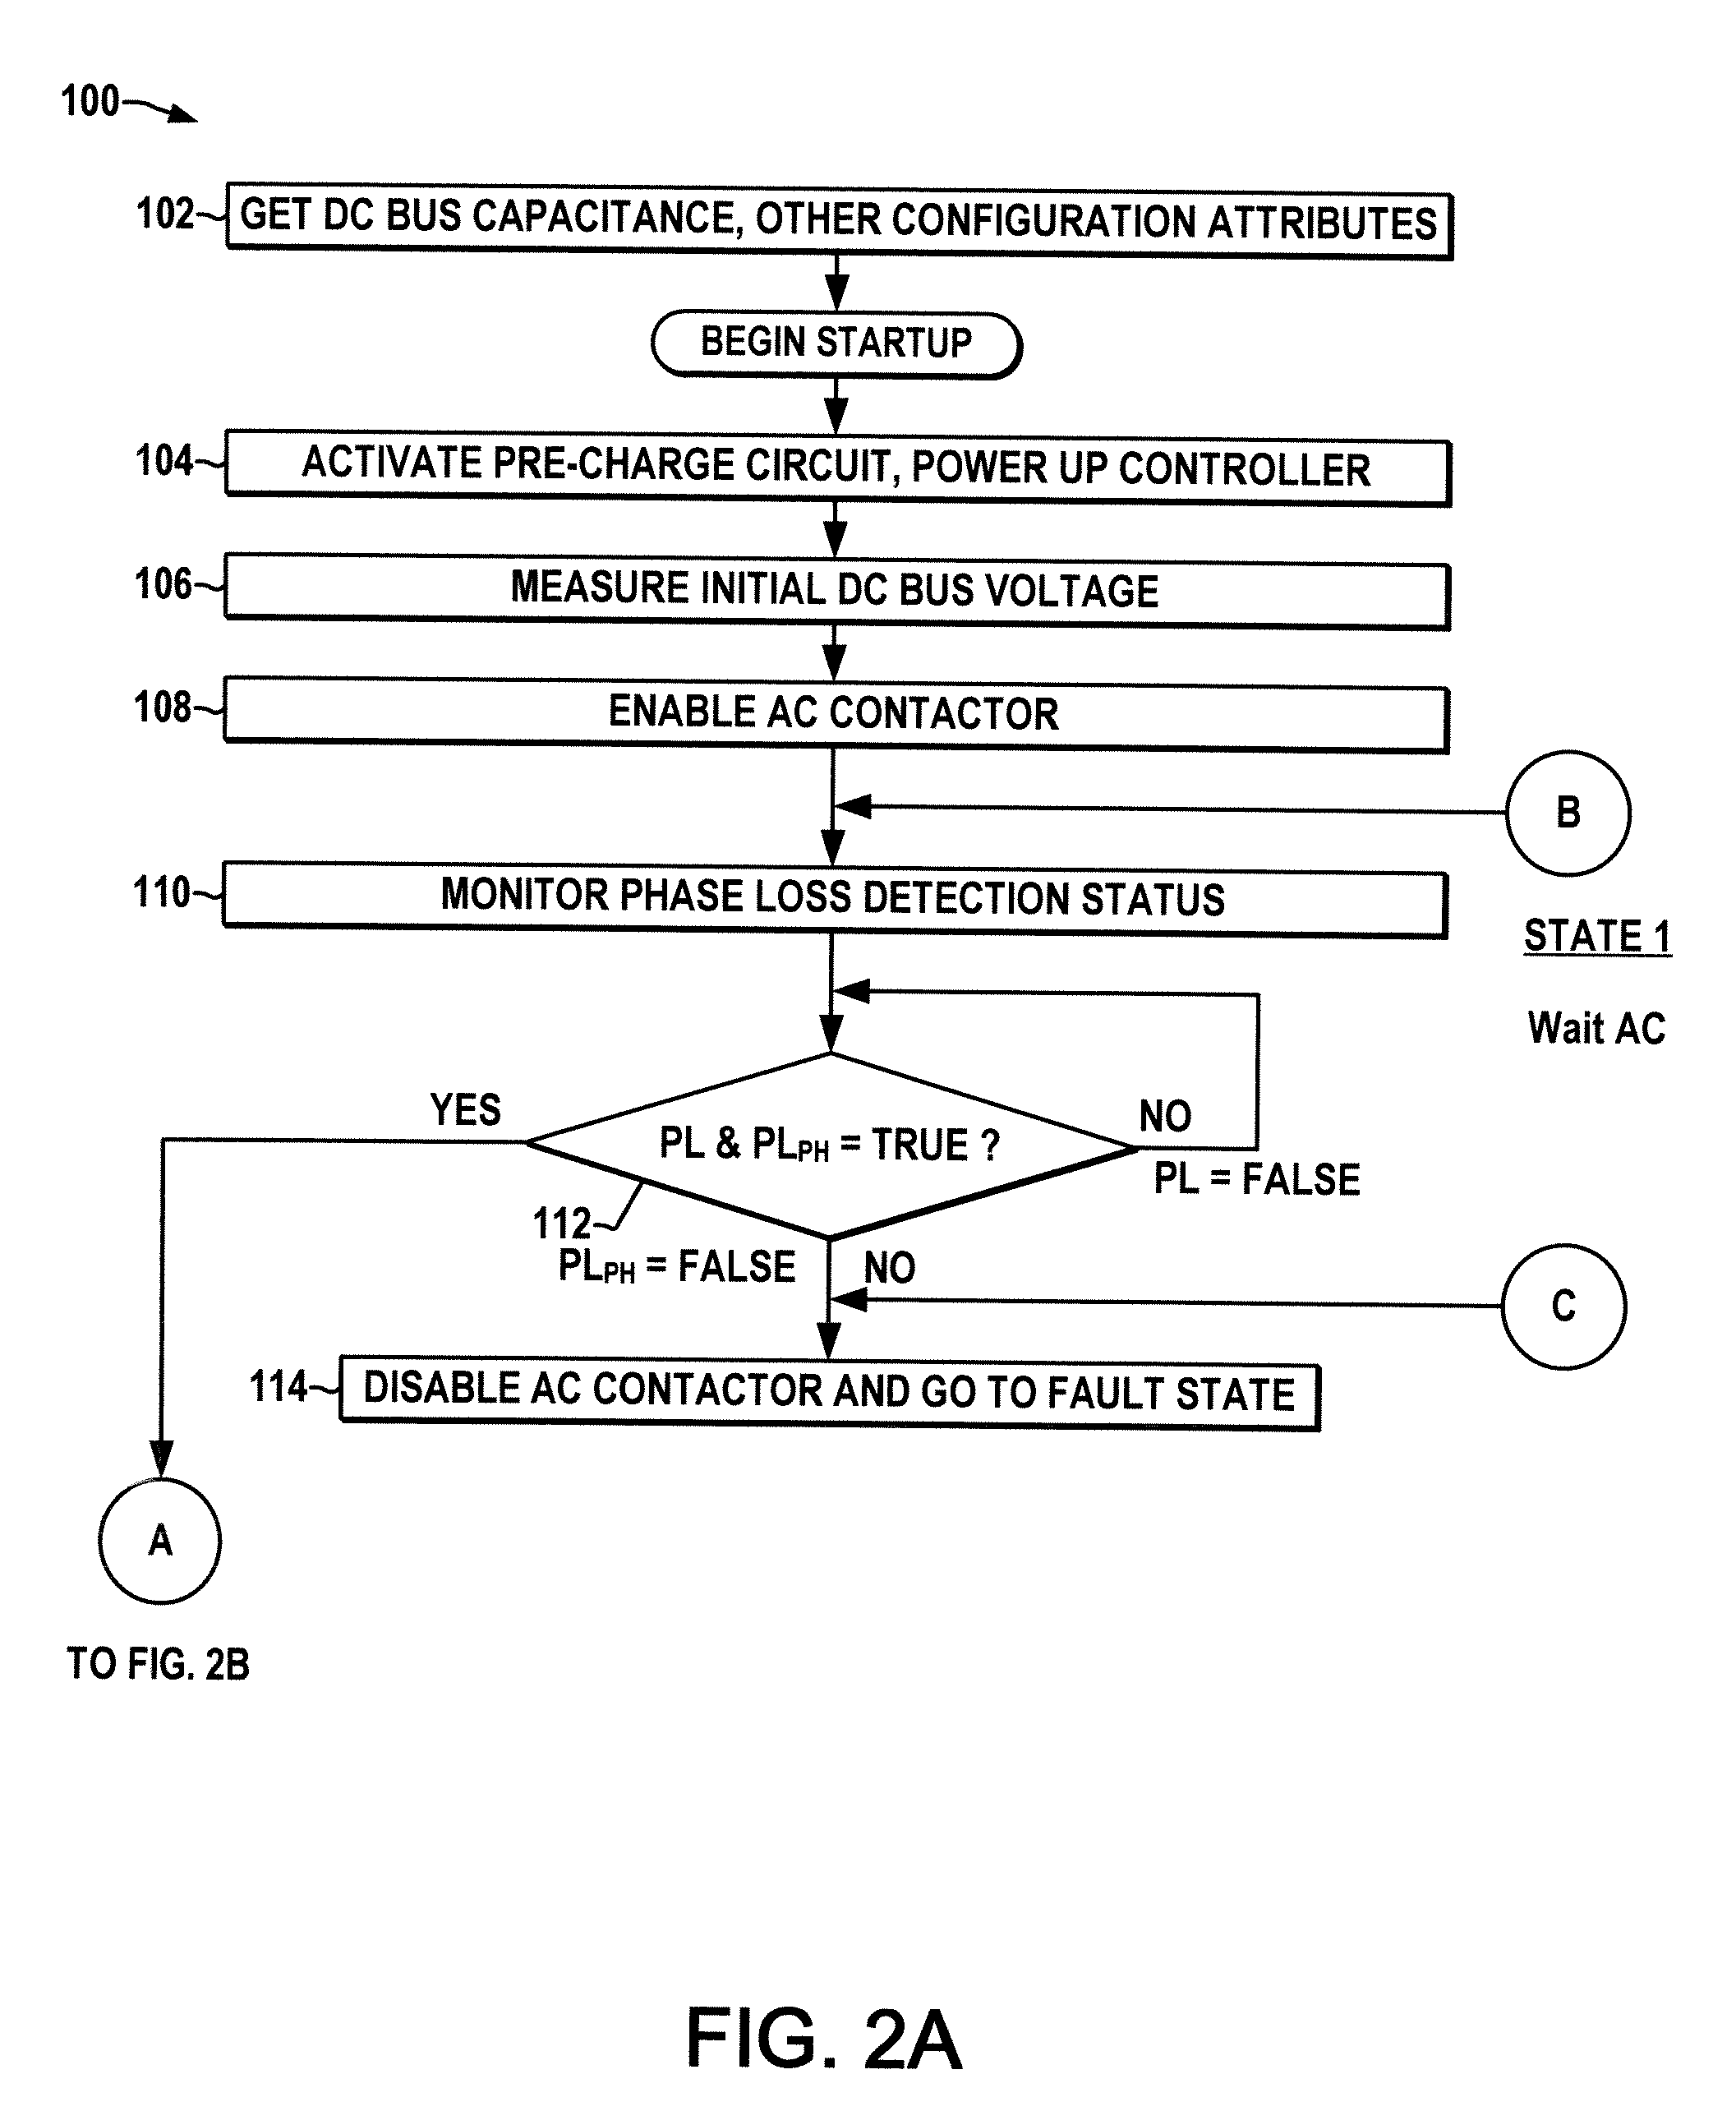 Method and apparatus for pre-charging power converters and diagnosing pre-charge faults